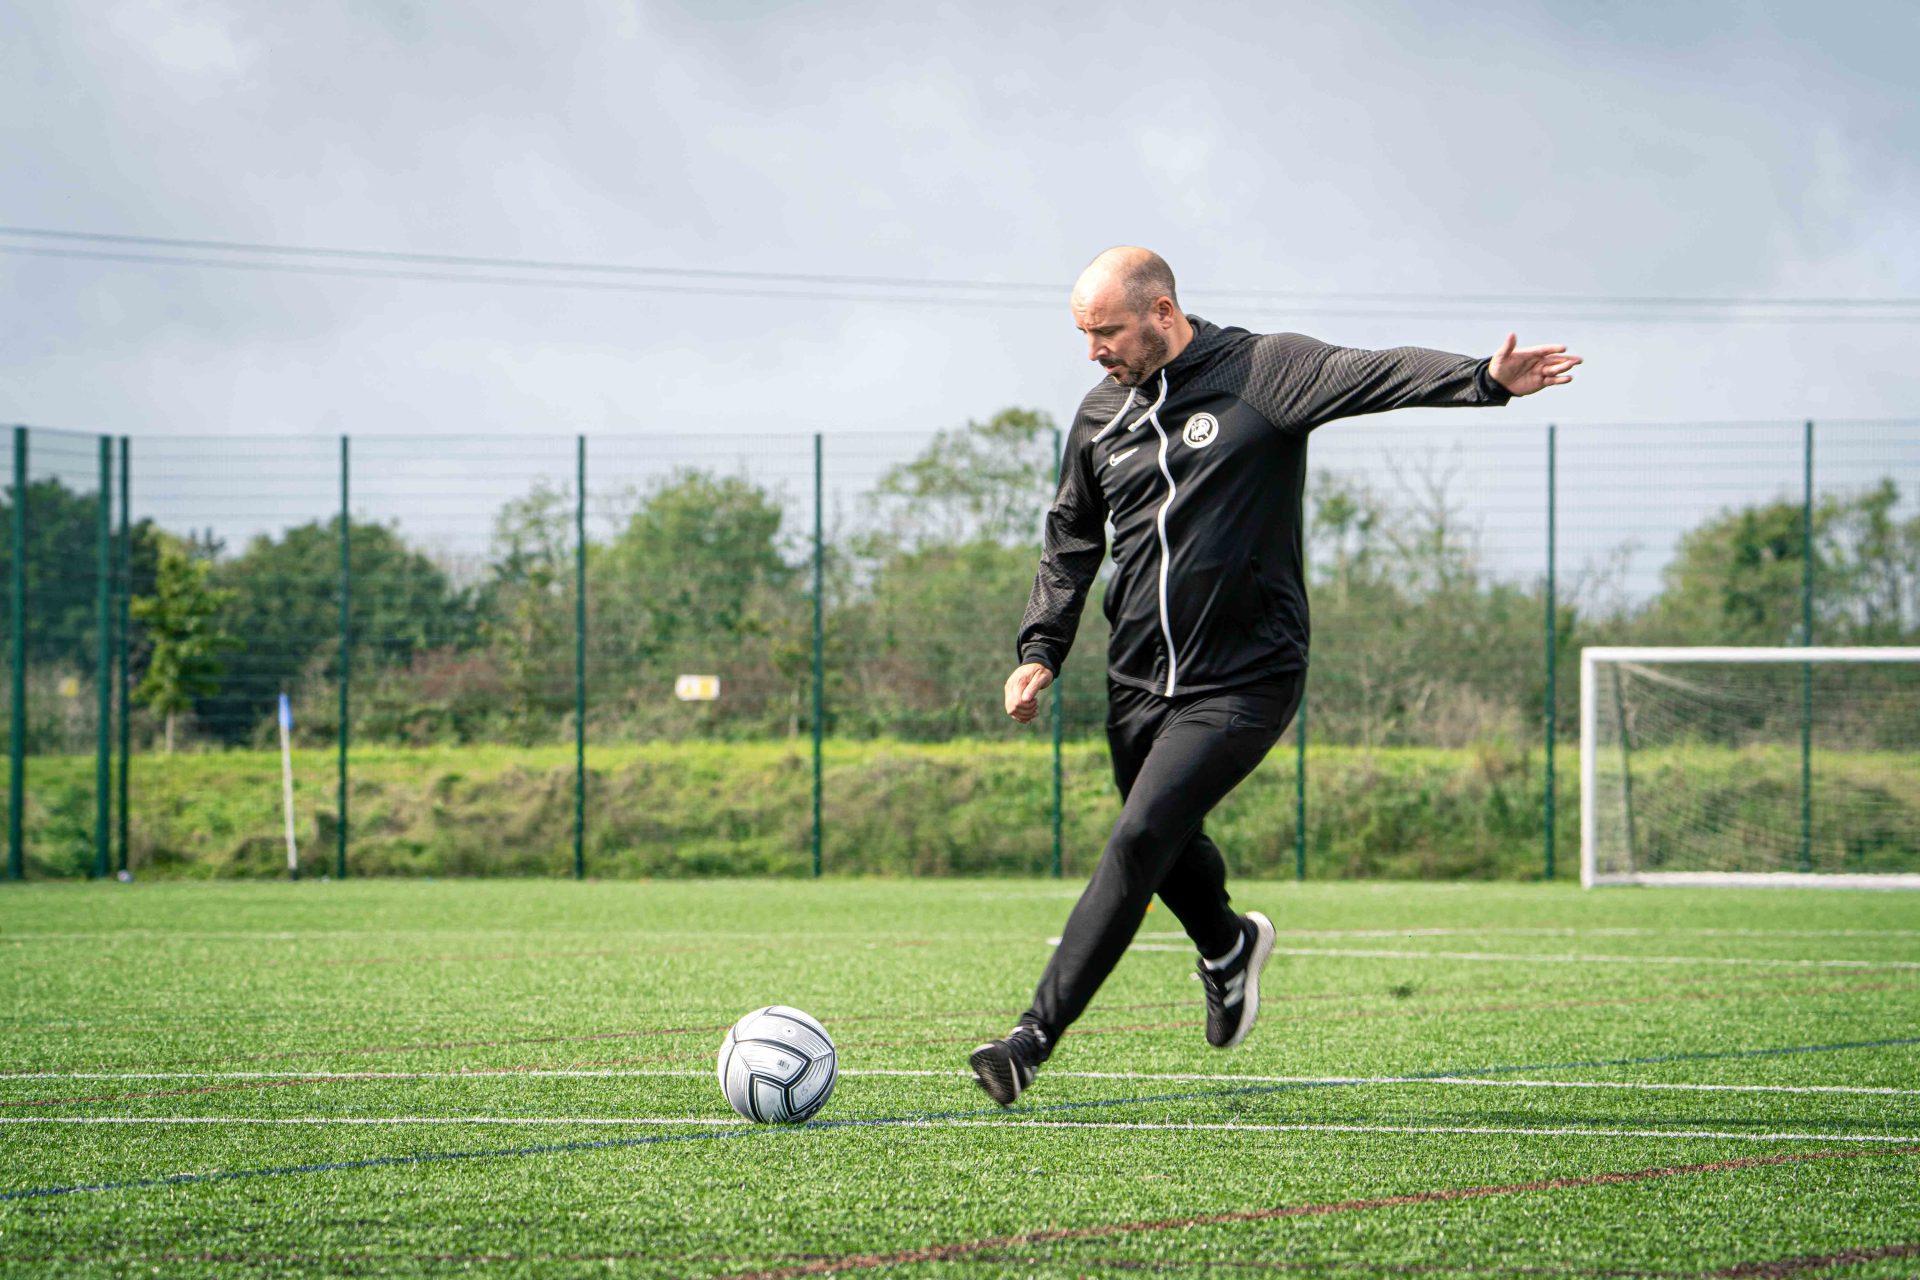 South Devon College is pleased to welcome a new Head Coach to its Pro:Direct Academy. Kev Wills is an experienced and talented coach who is joining the ranks of coaching staff at the college’s dedicated football course, Pro:Direct Academy.